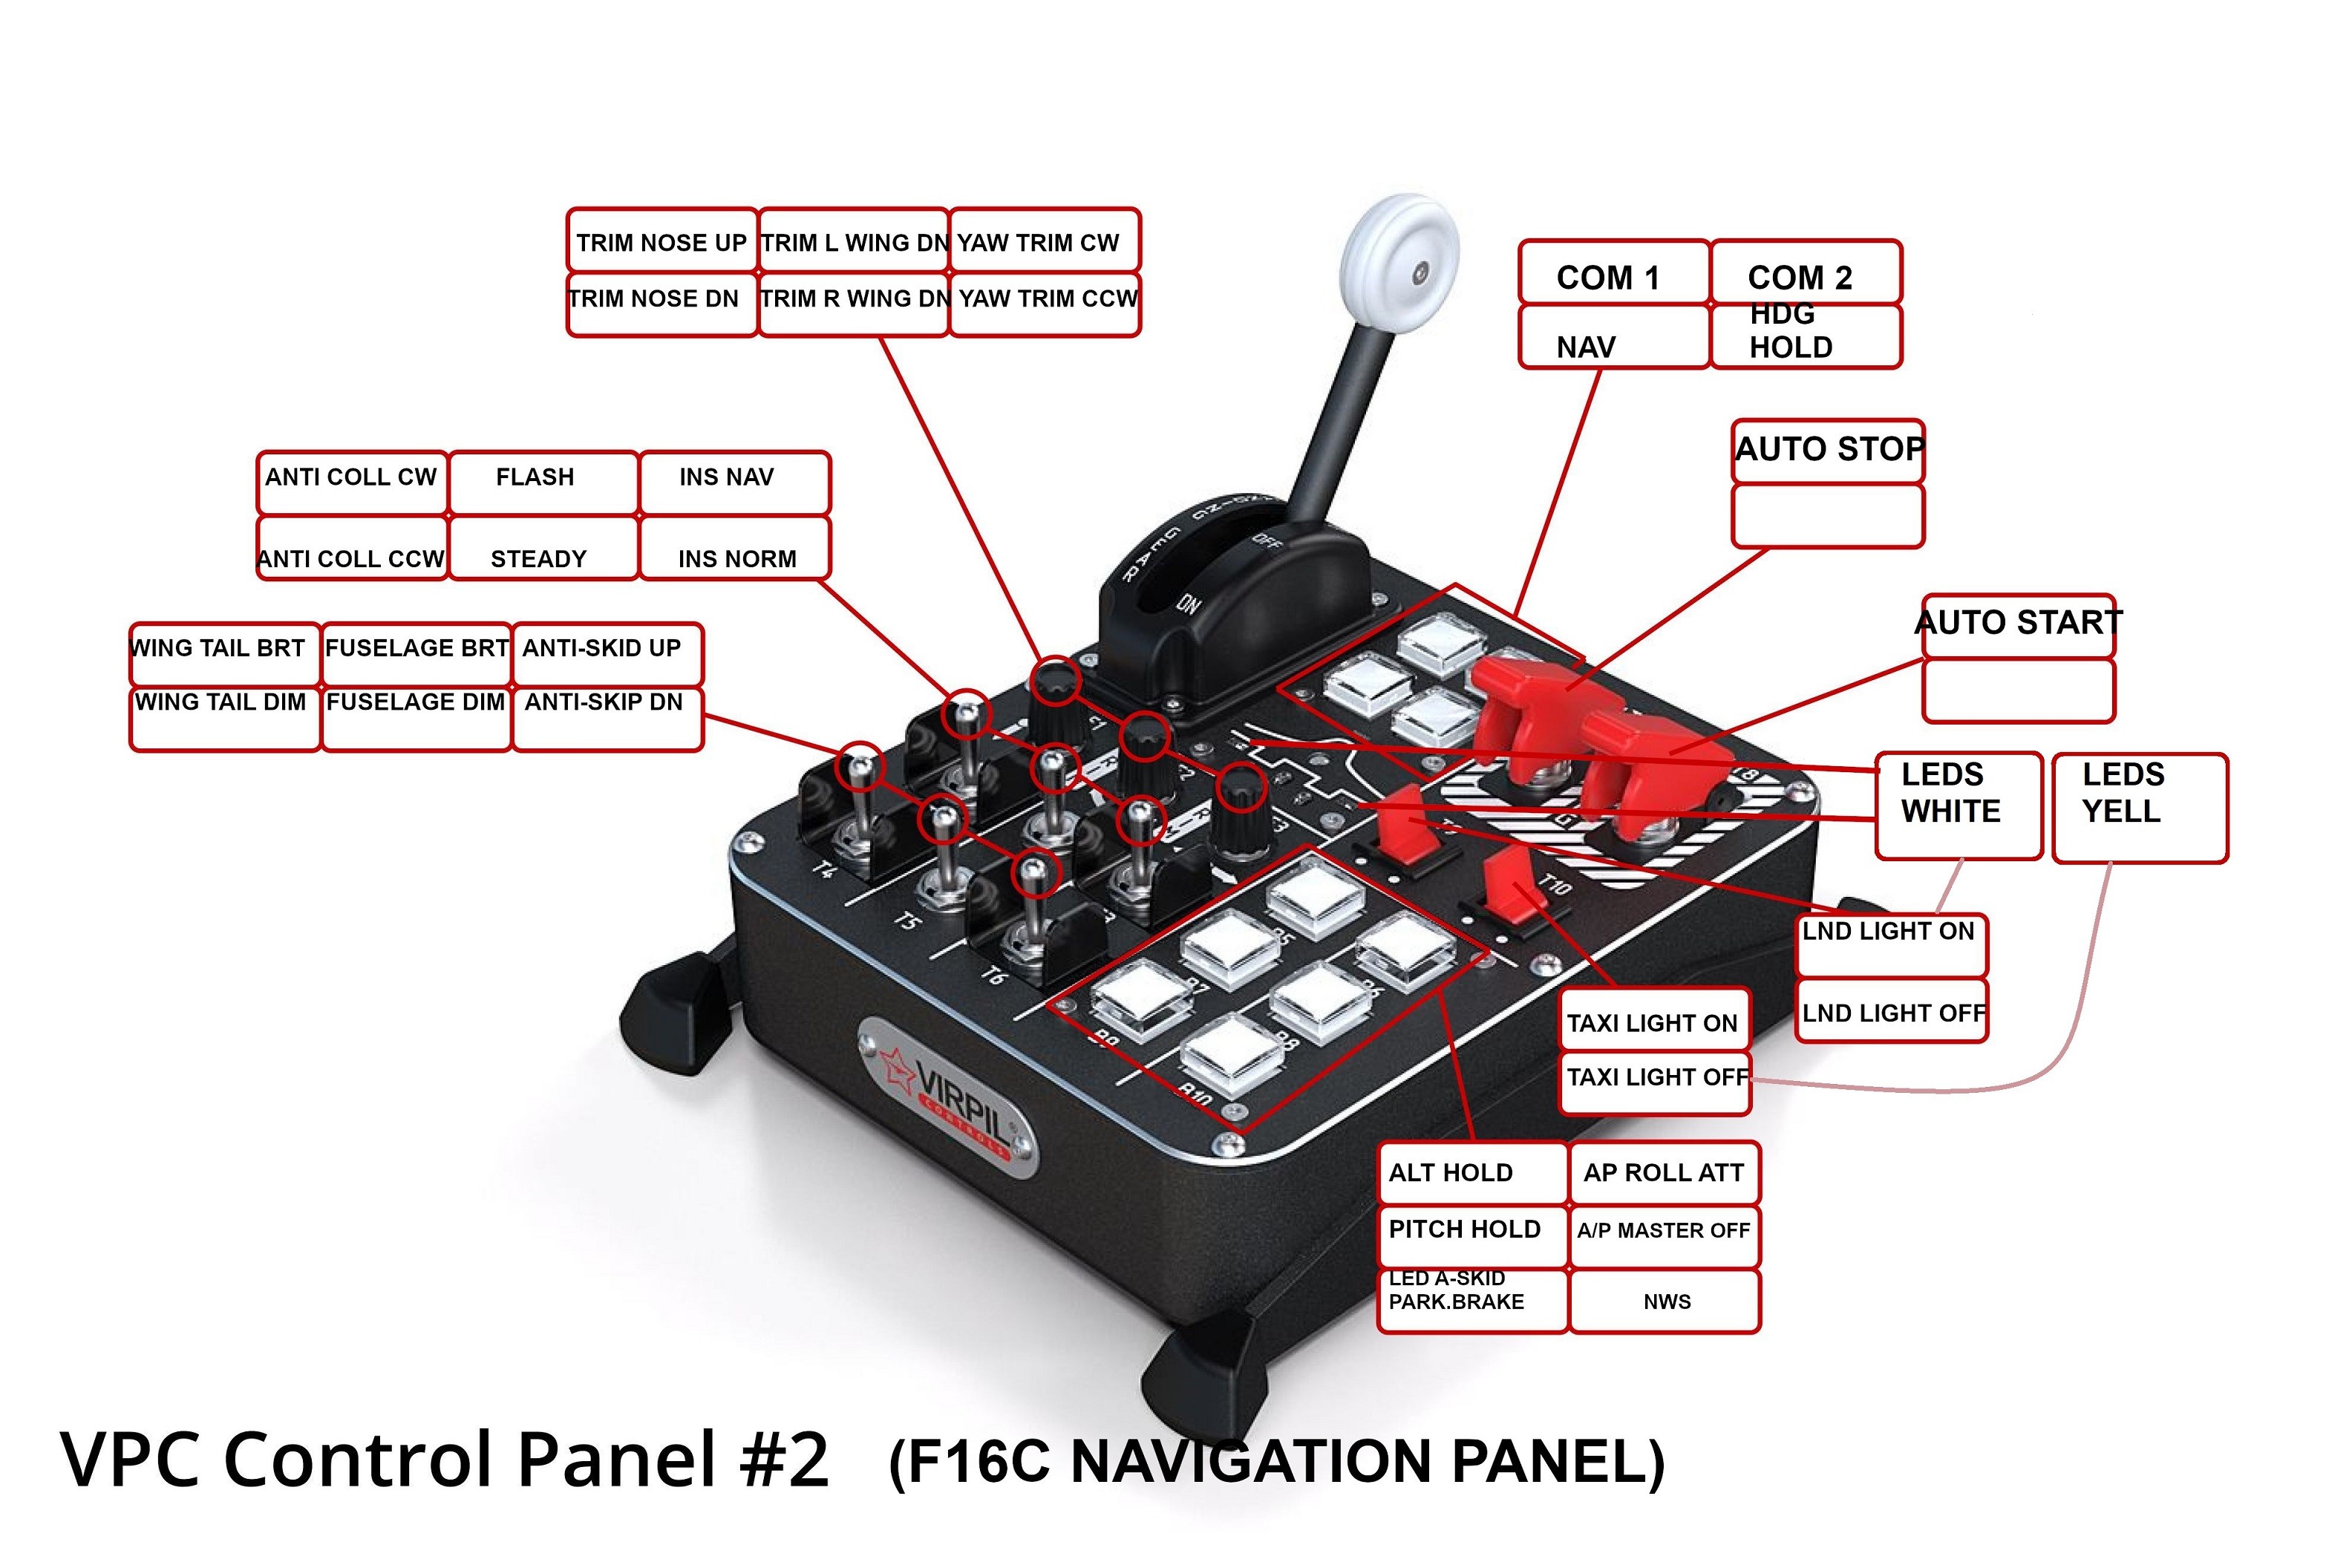 VIRPIL CP 1 AND 2 FOR F-16C - VIRPIL Controls - ED Forums